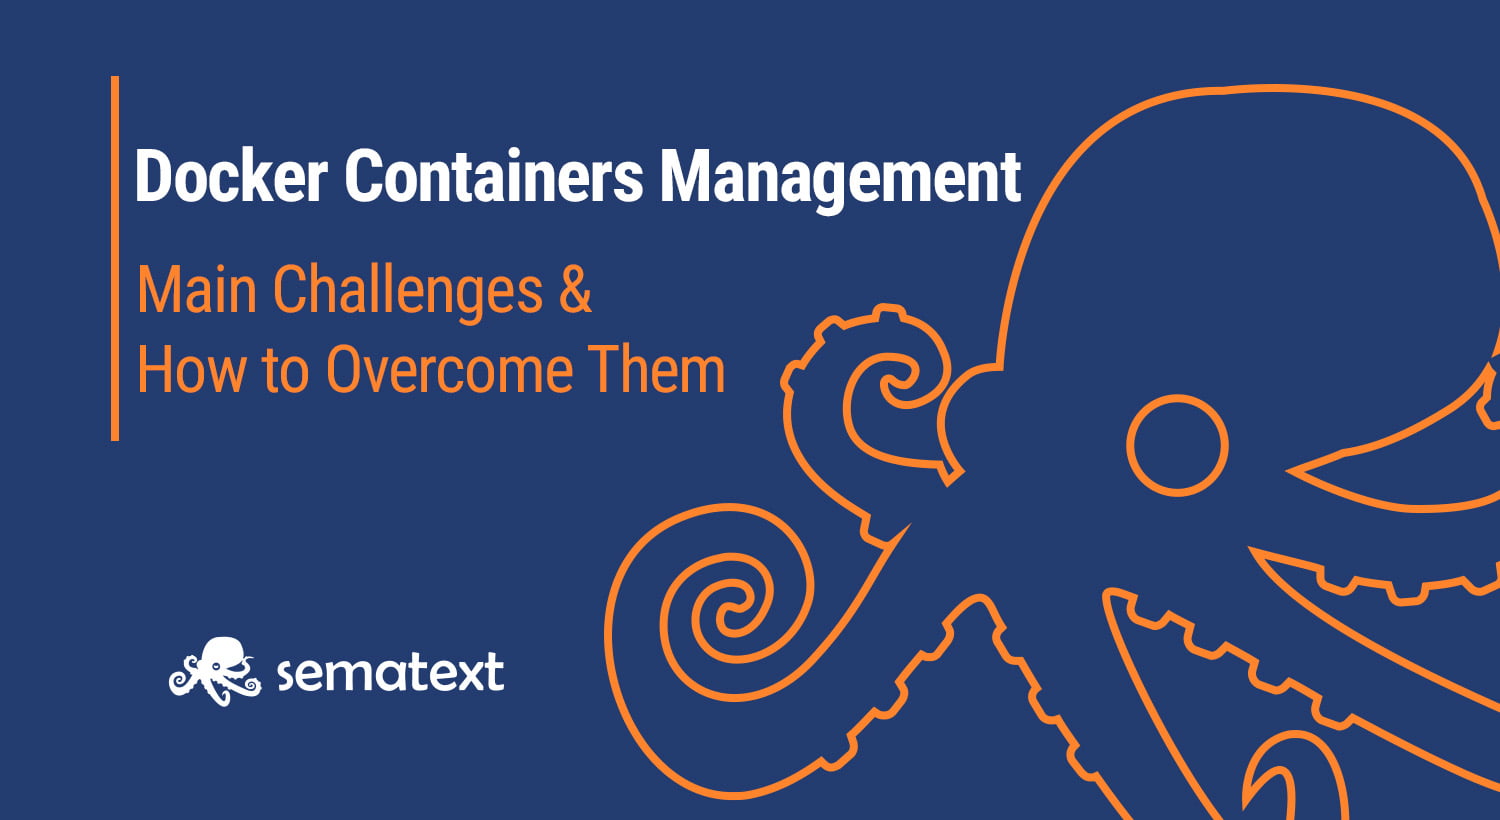 Docker Containers Management: Main Challenges & How to Overcome Them